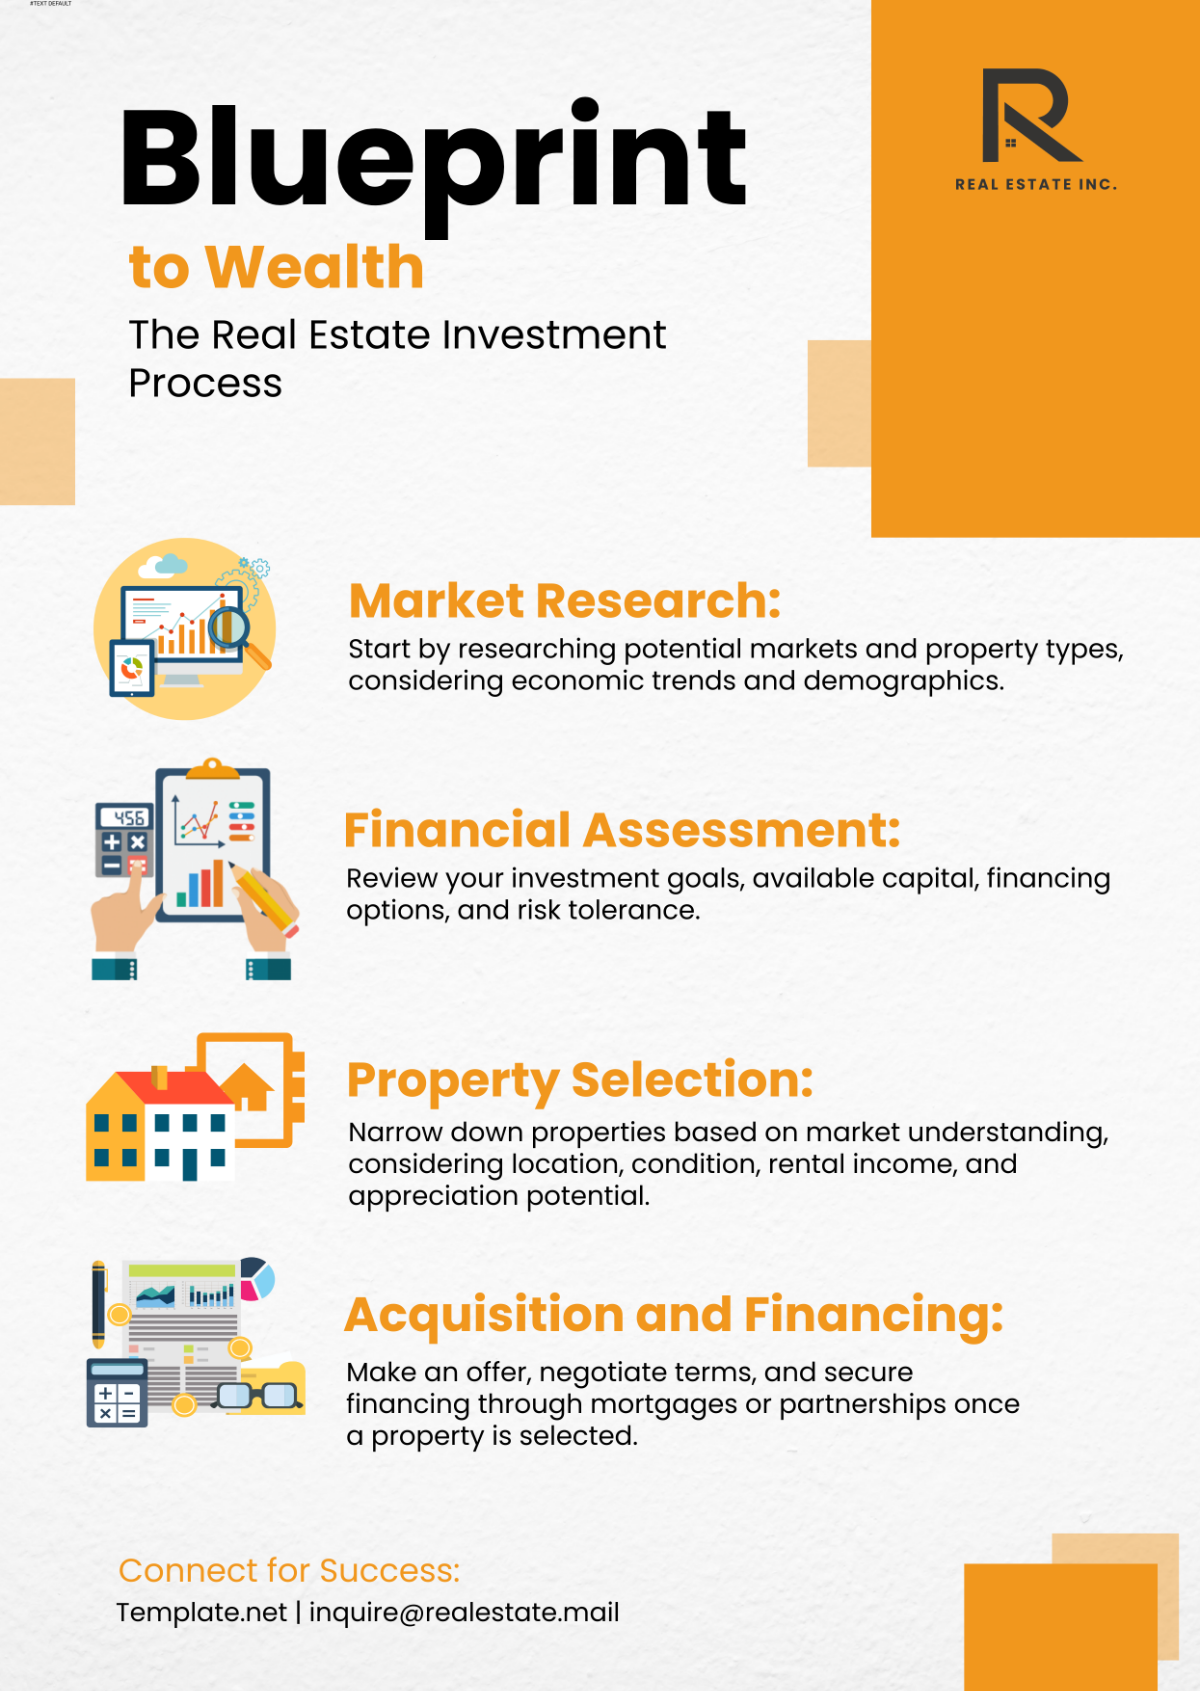 Real Estate Investment Process Infographic